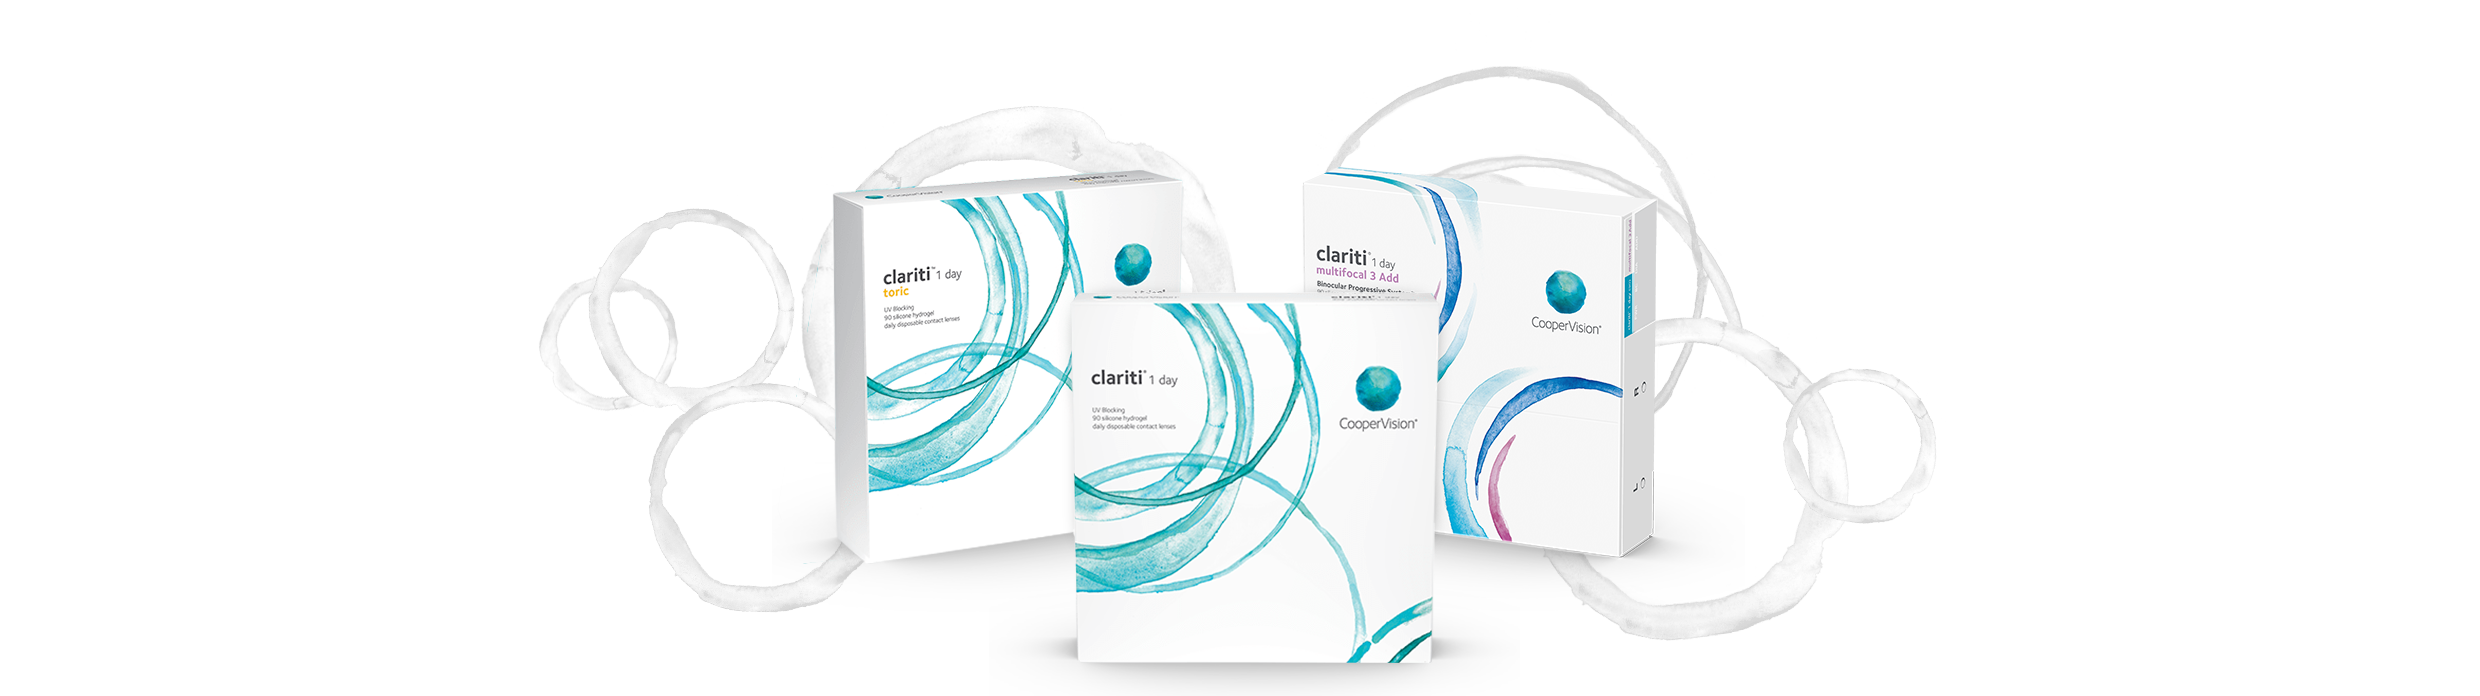 clariti 1 day family of contact lenses